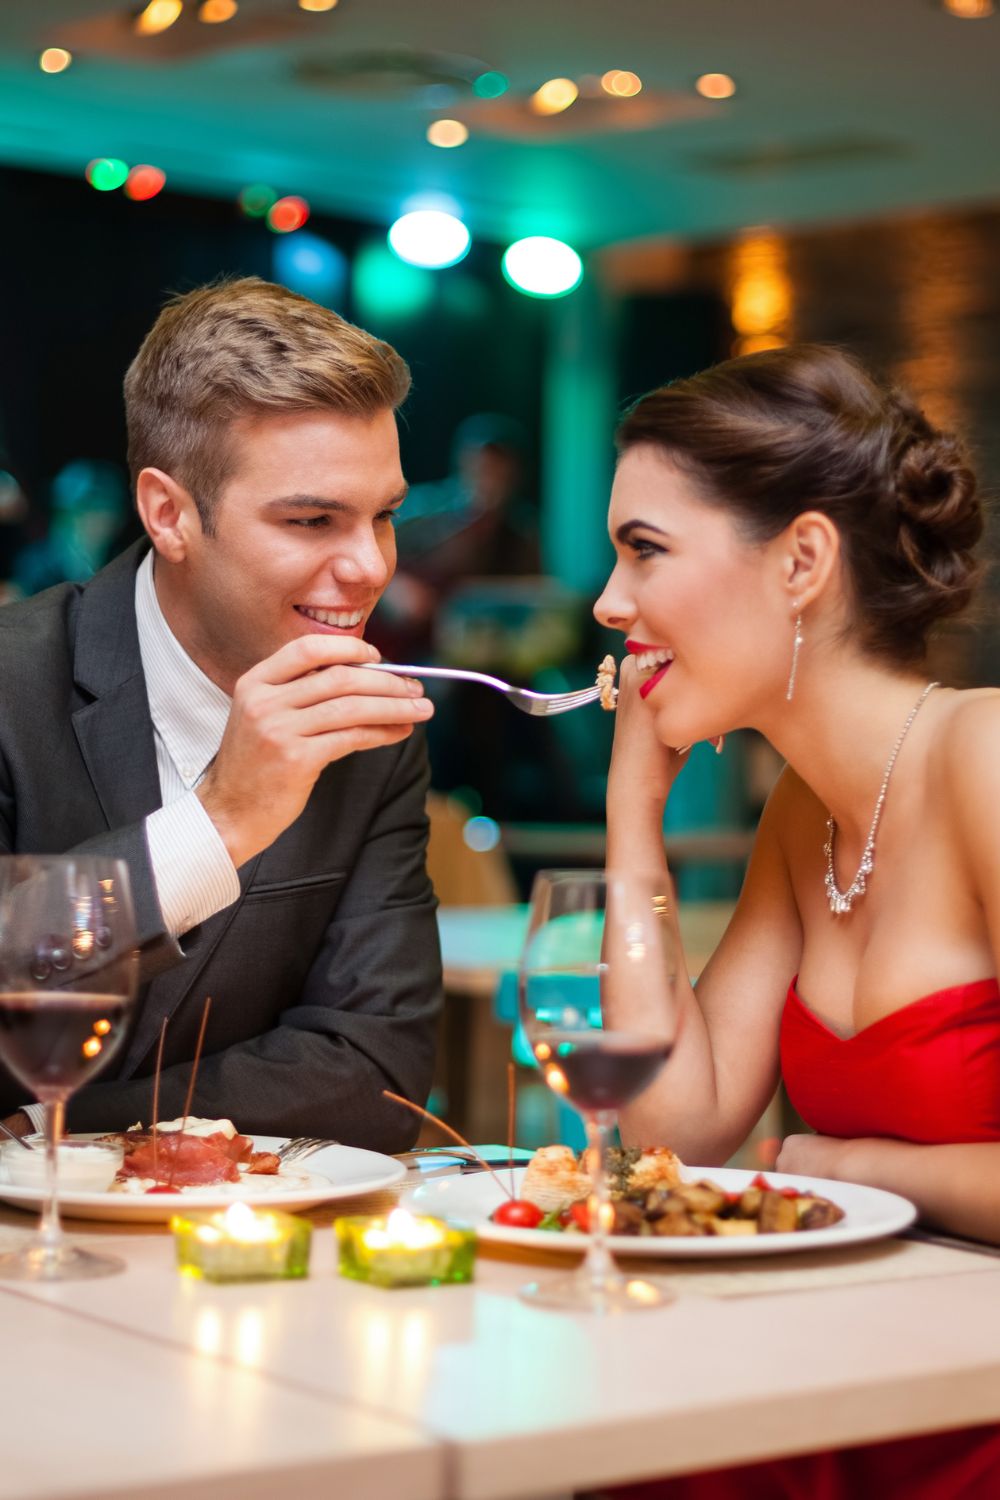 10 SIGNS YOUR FRIEND WITH BENEFITS IS FALLING FOR YOU